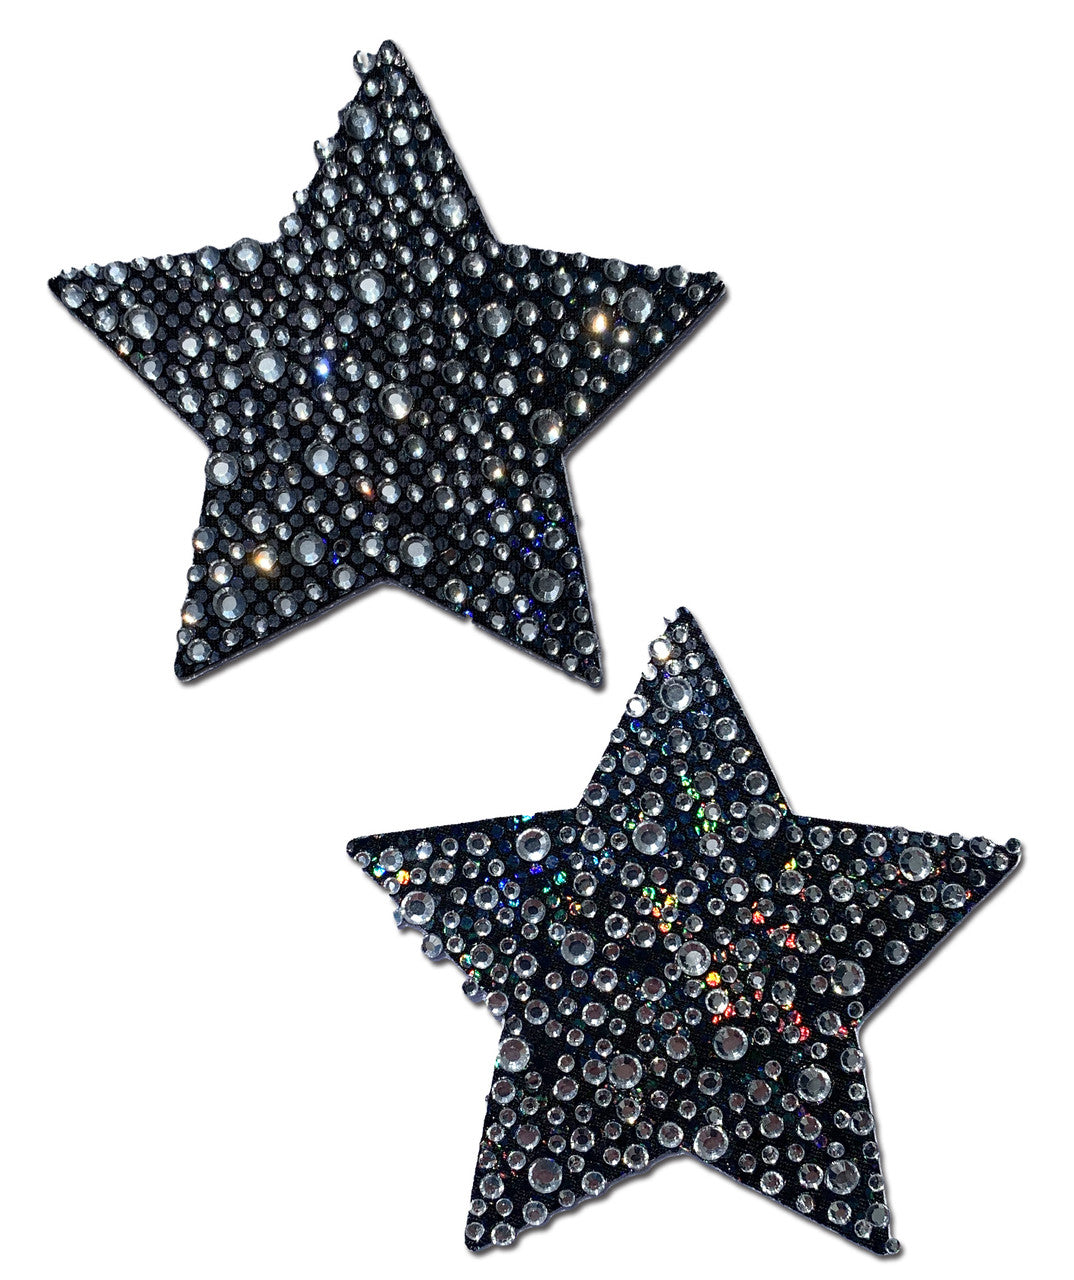 Pastease Crystal Sparkling Star Pasties Silver